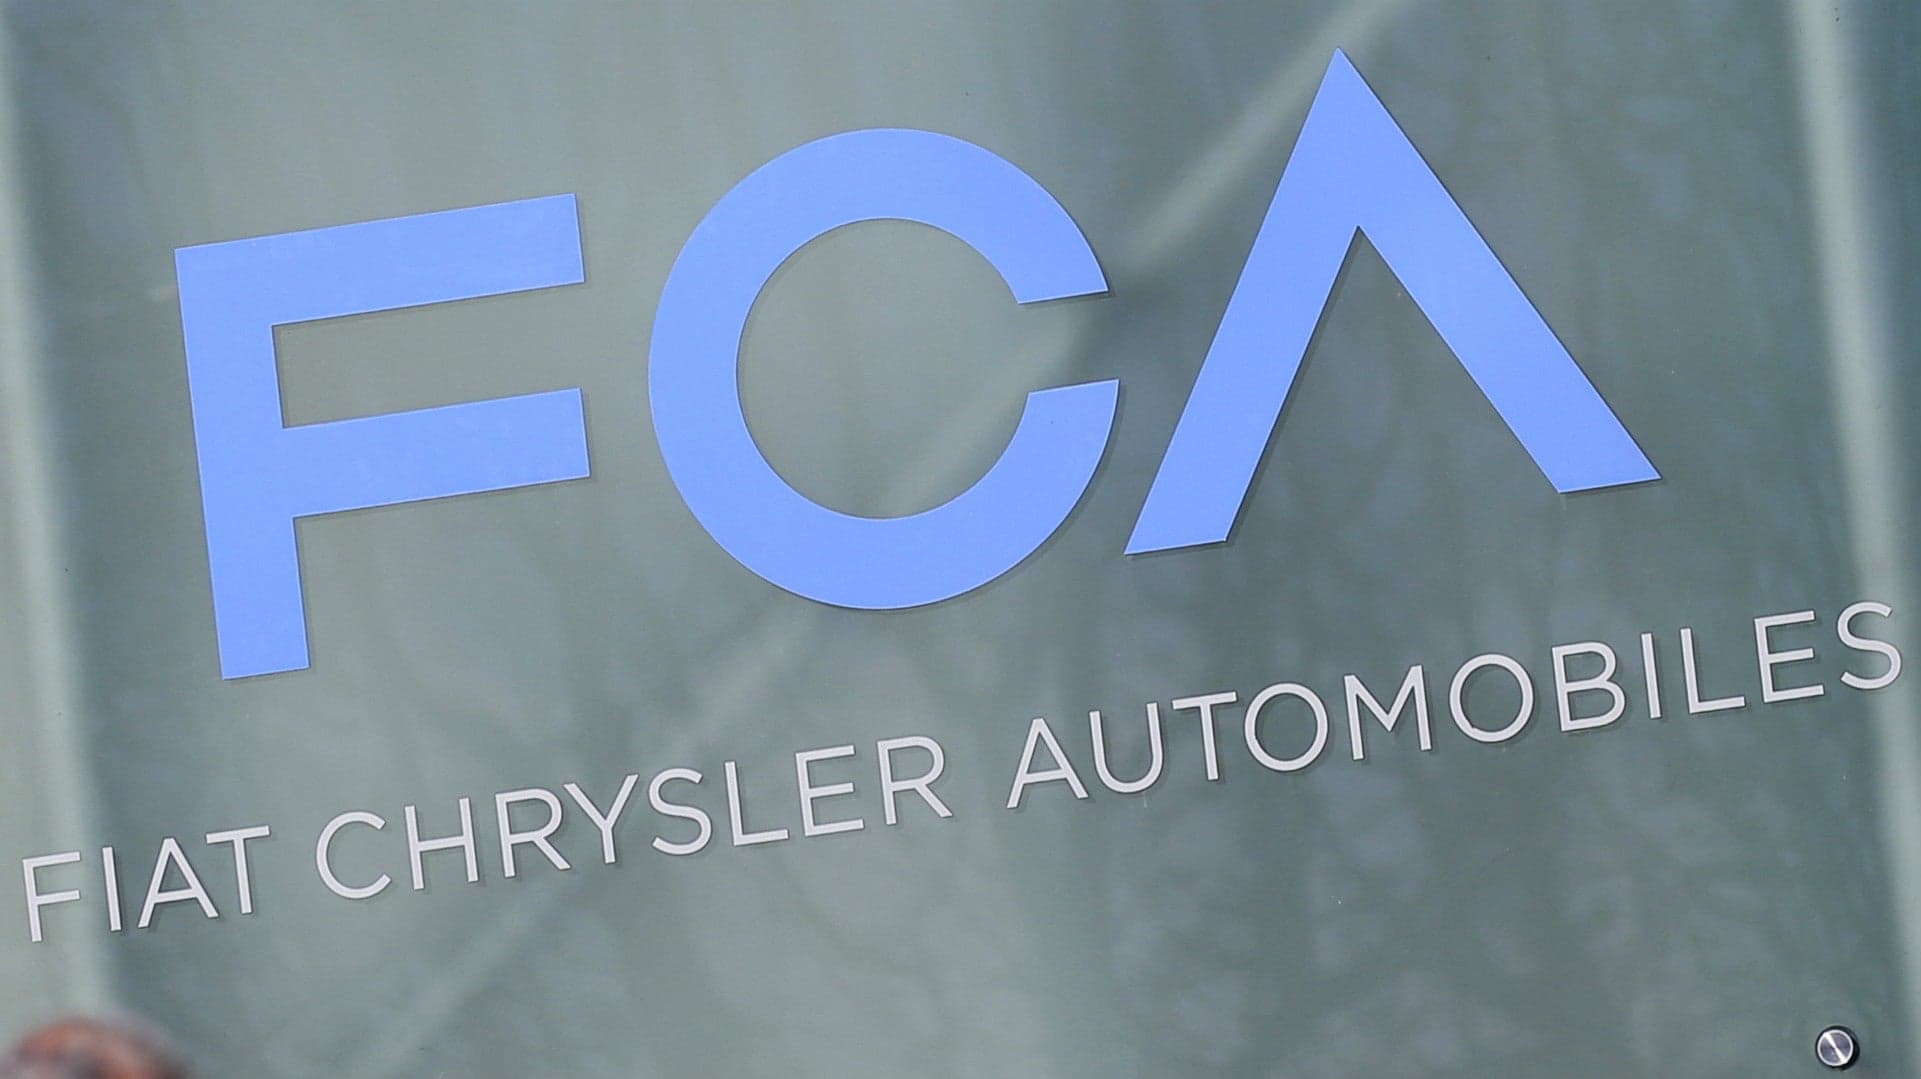 FCA Opens Distribution Center in Michigan, Second in U.S. This Year